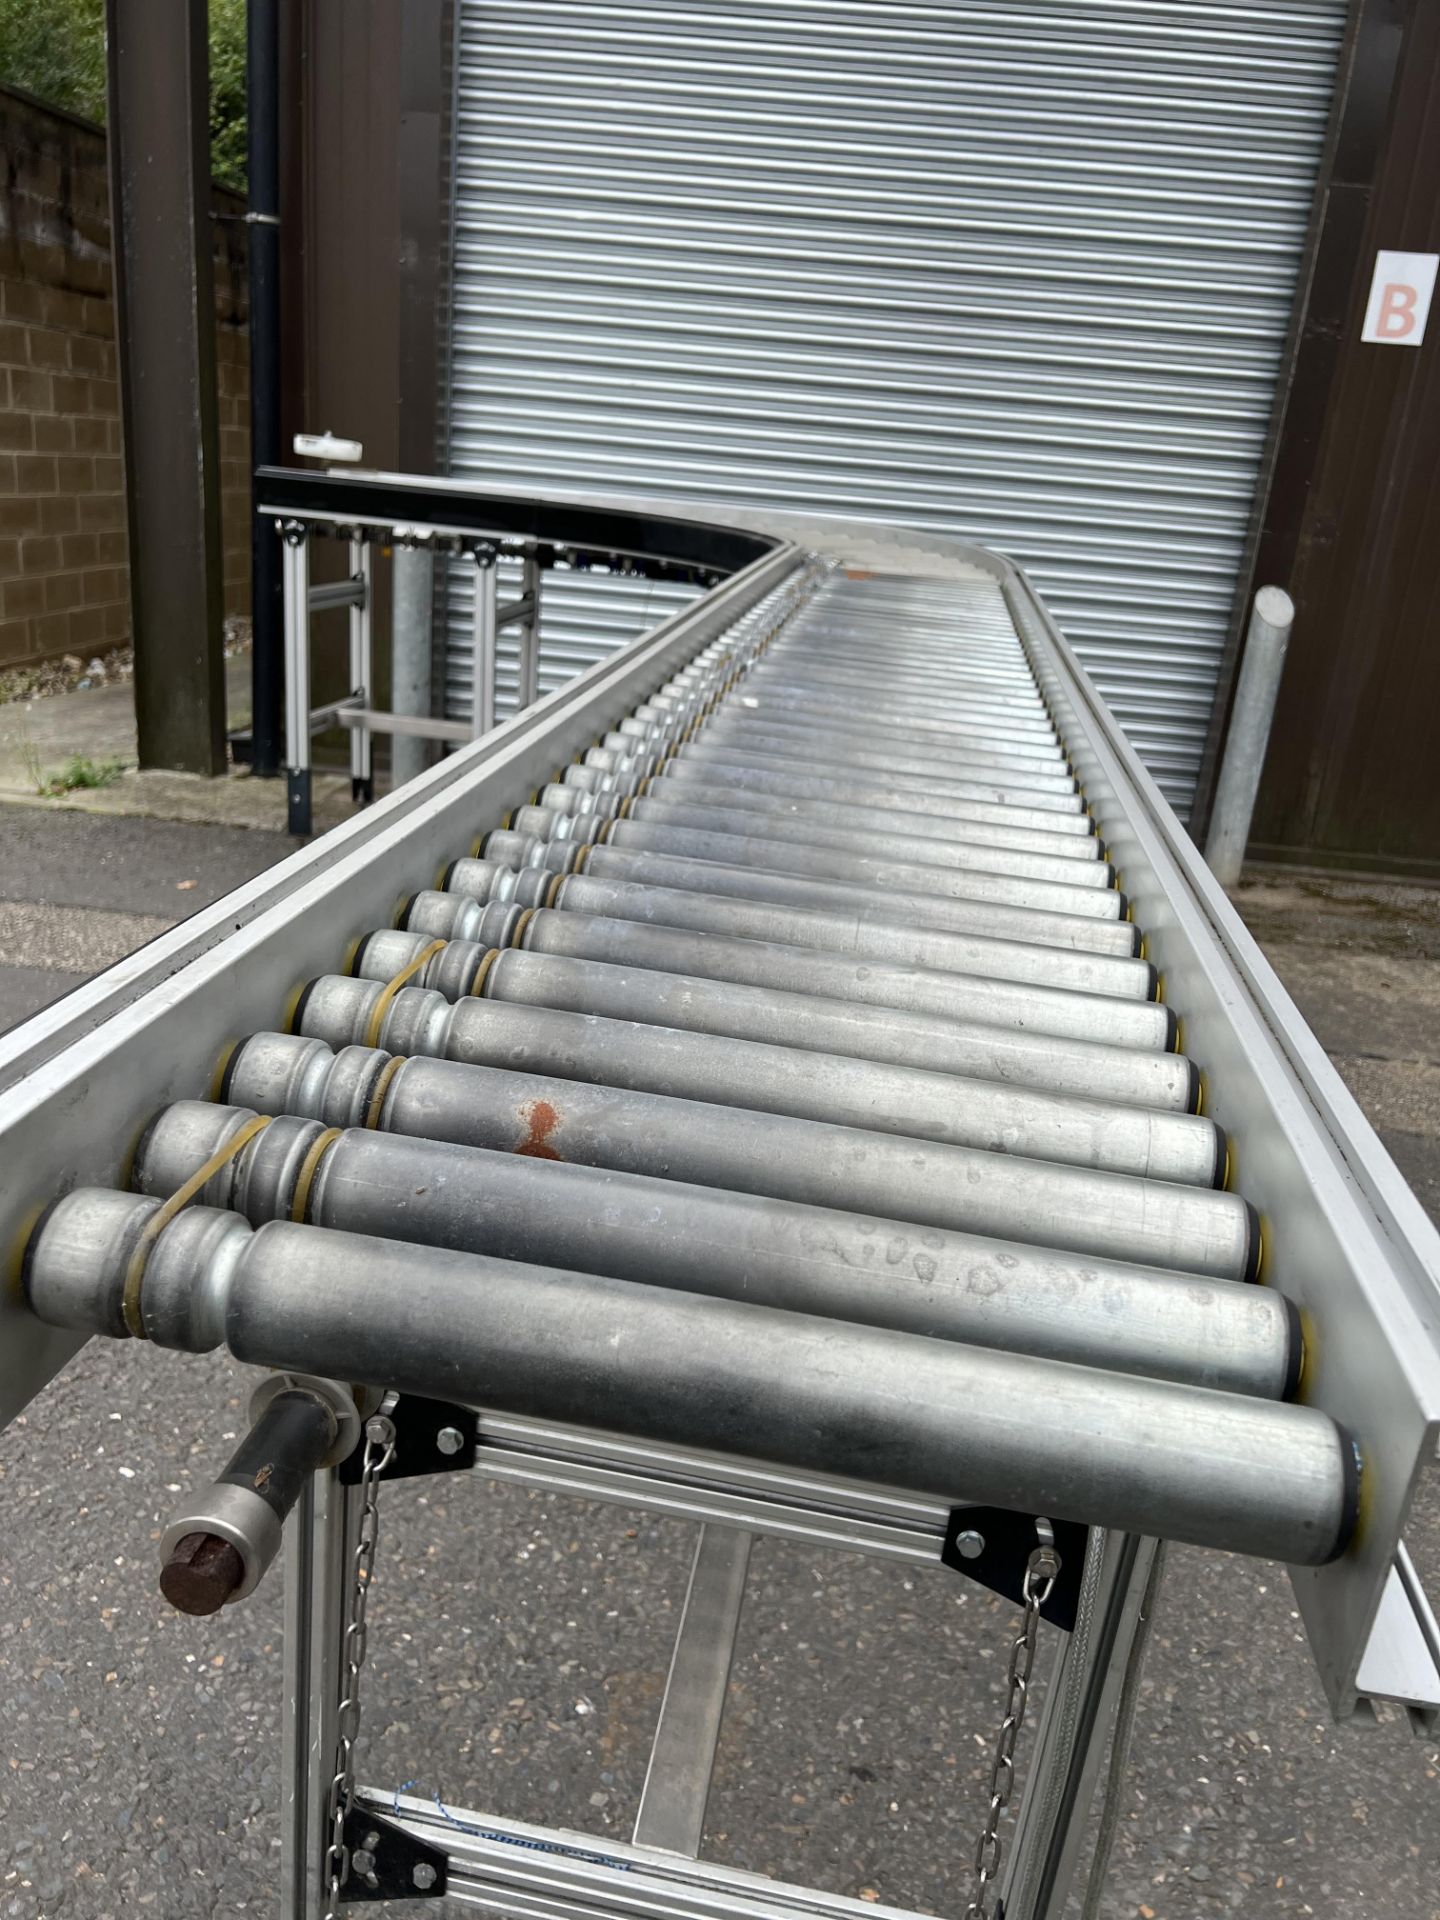 L Shaped Powered Roller Conveyor, roller approx. 45cm wide, 3.5m long x 1.7m, 4.4m x 2.2m x 1.3m - Image 2 of 6